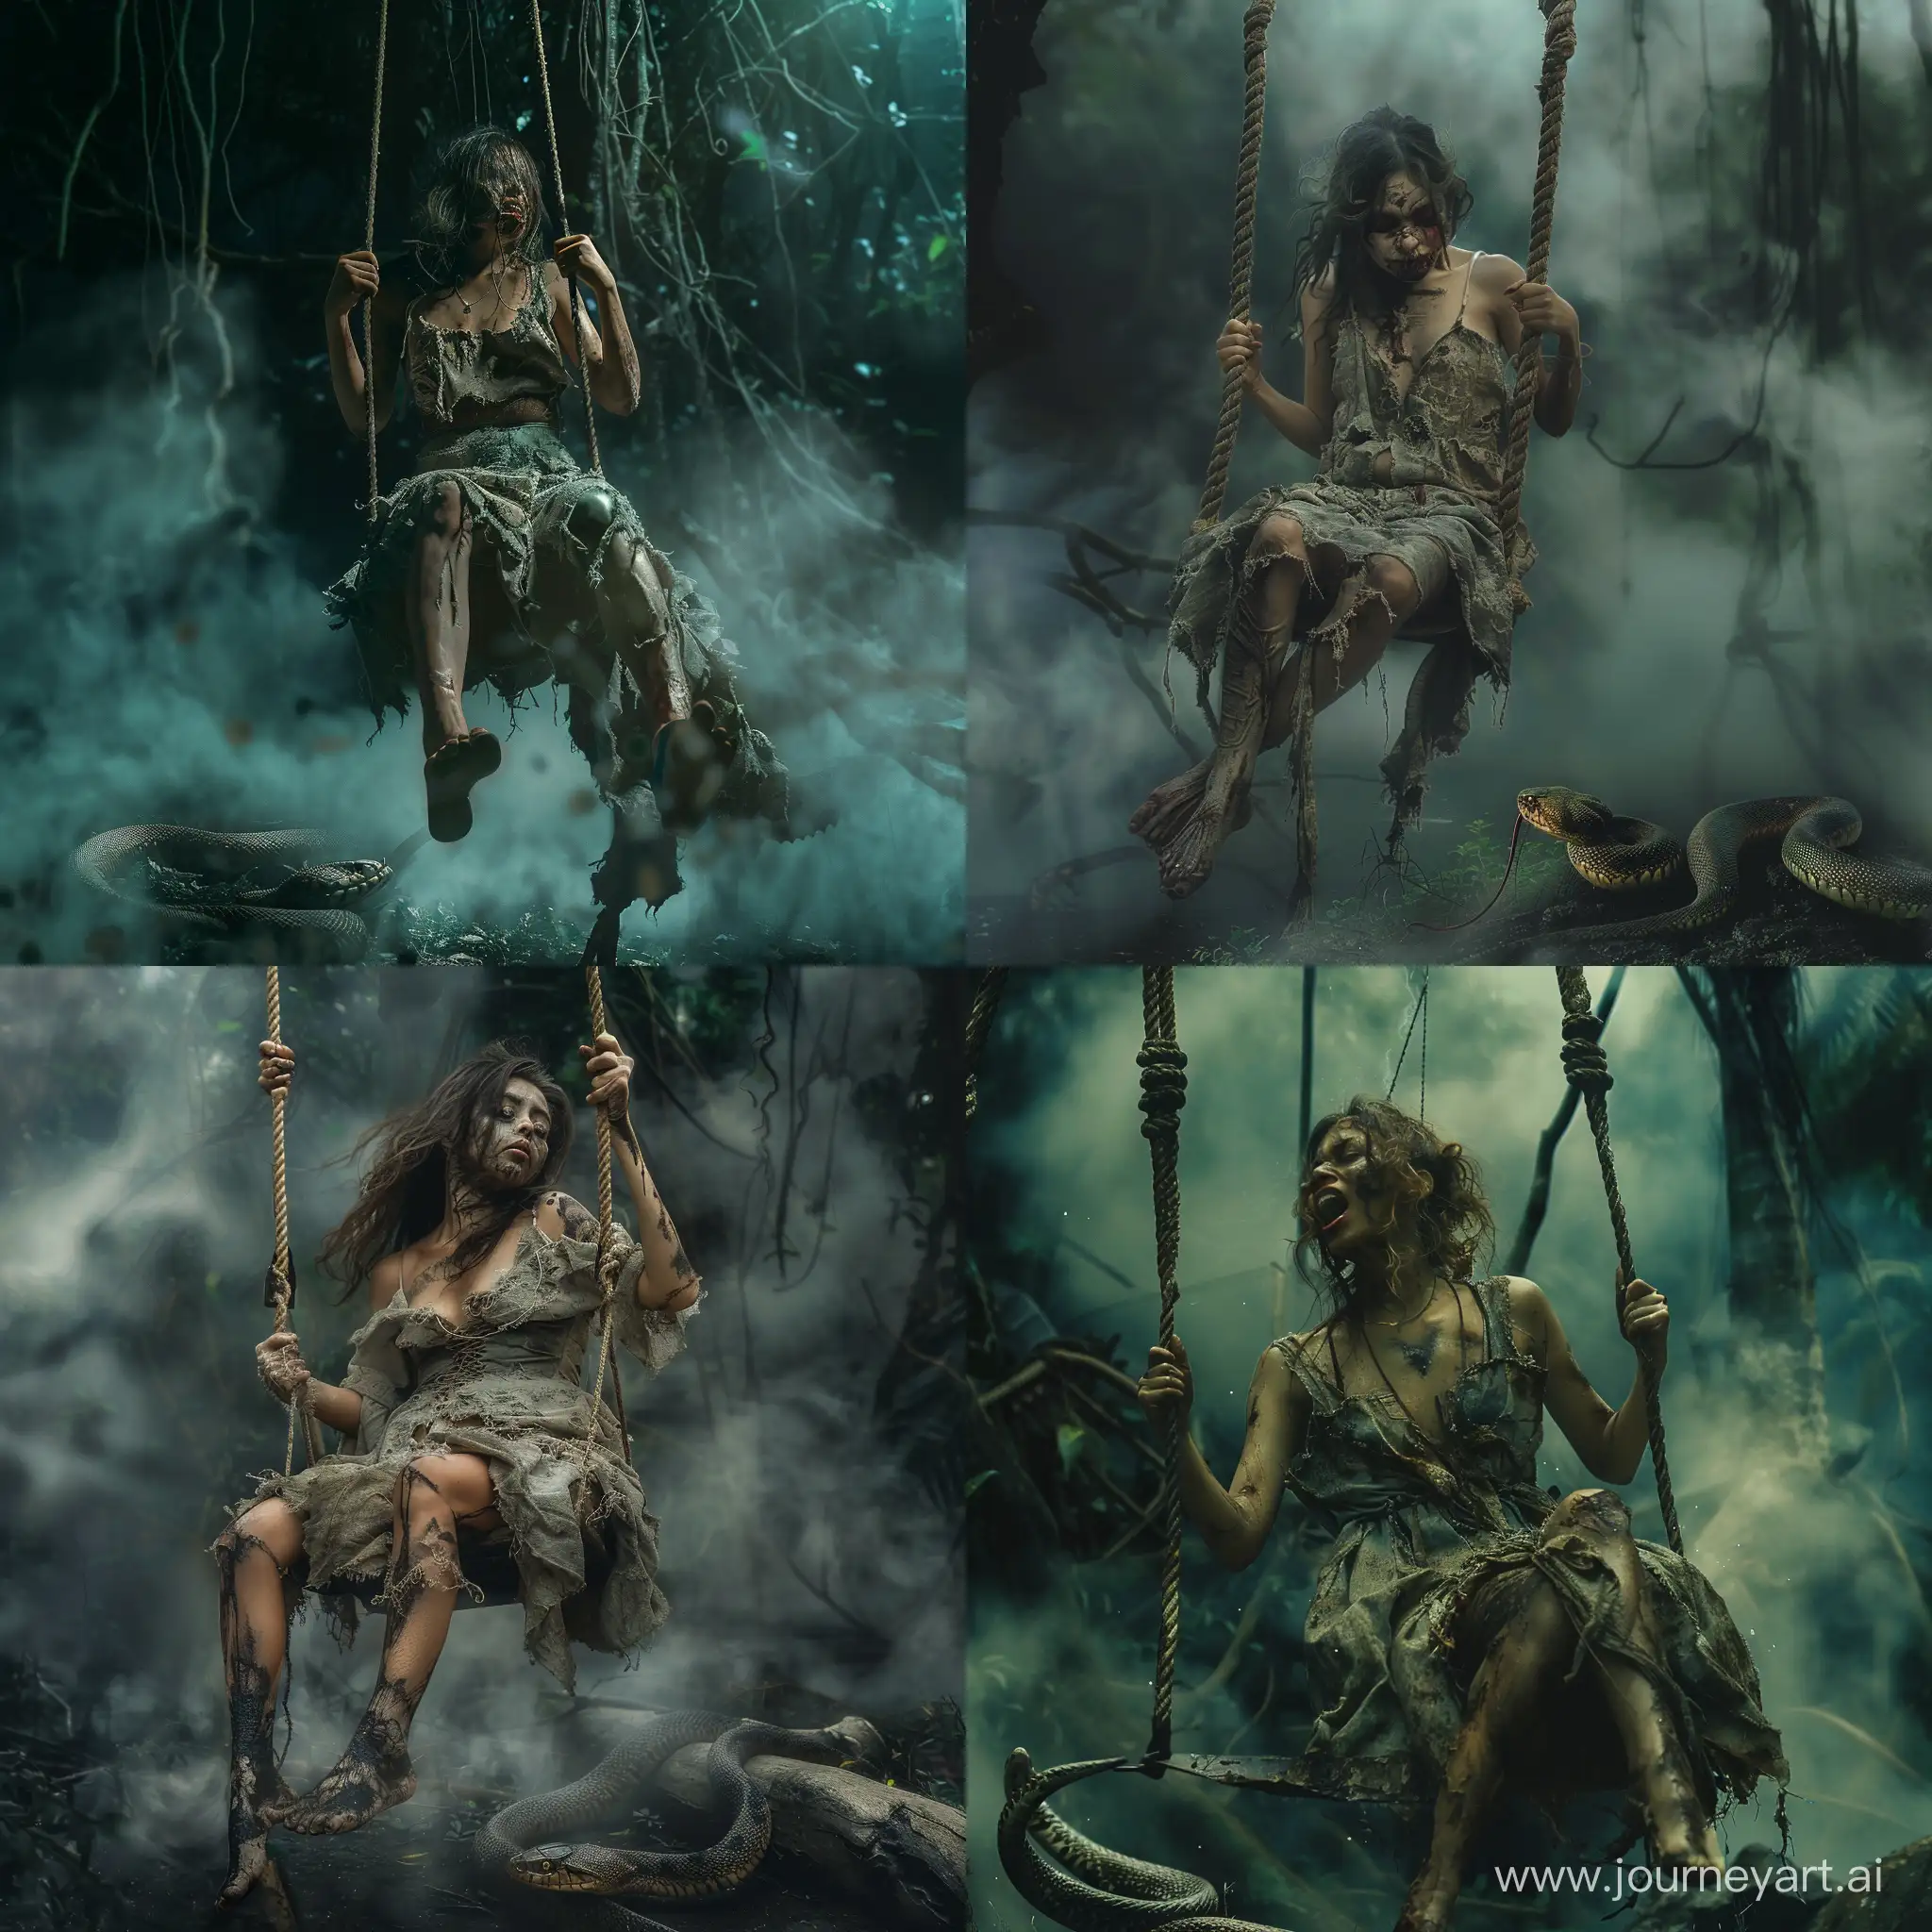 A woman with deformed body and face wearing ripped and dirty baggy dress riding a swing at a dark mysterious forest. Mystic fogs around. There is a venomous serpent on the ground. Gothic style. Cinematic photography.